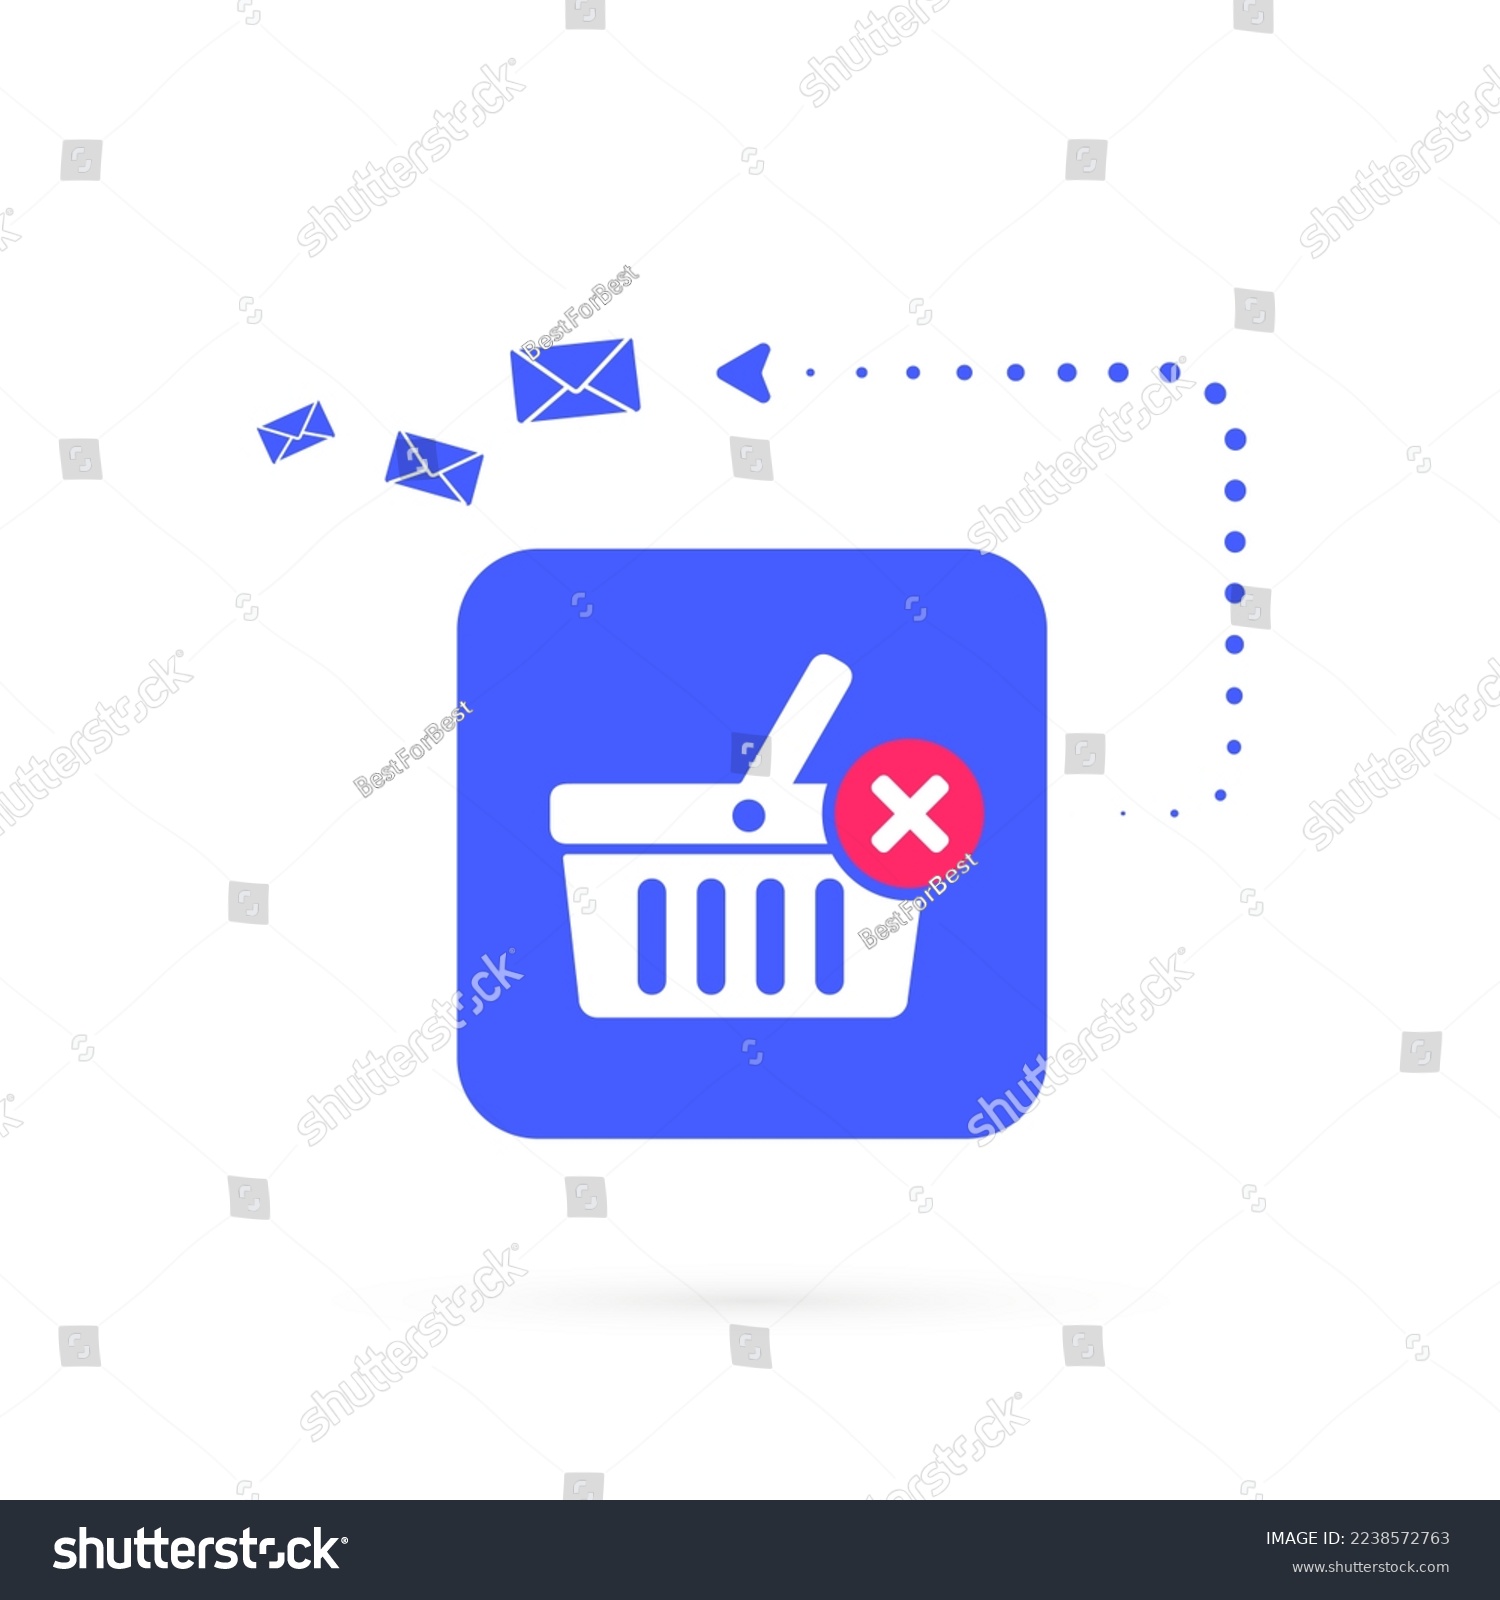 SVG of Abandoned Shopping Cart Recovery Email Strategies vector icon business concept. Sending a marketing email to a customer who has added an item to their shopping abandoned cart but not completed order svg